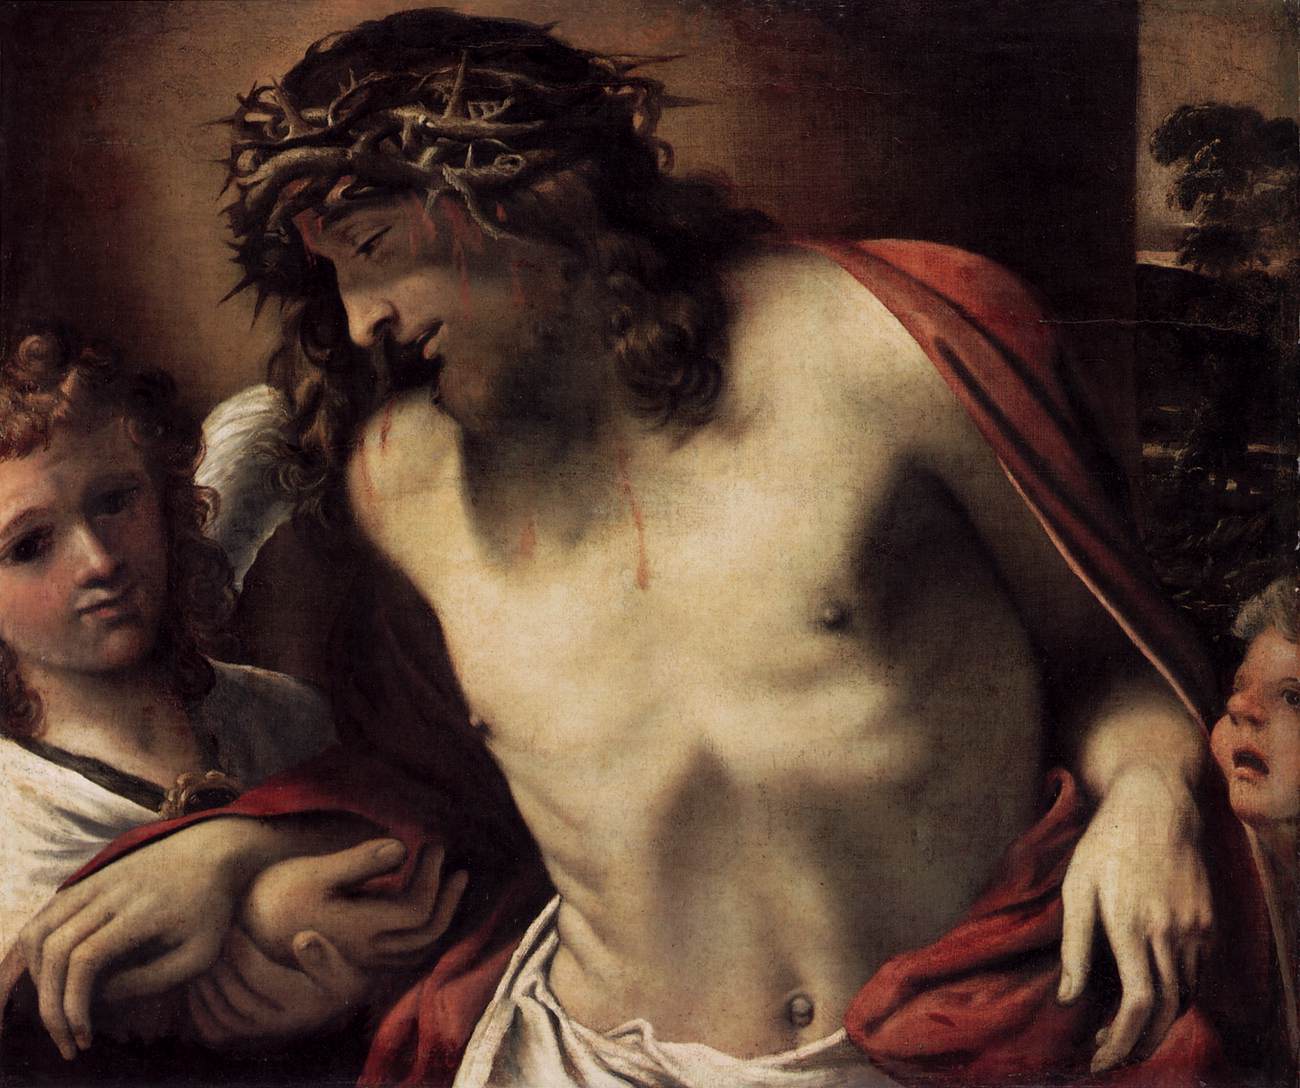 Christ with the Crown of Thorns, Supported by Angels